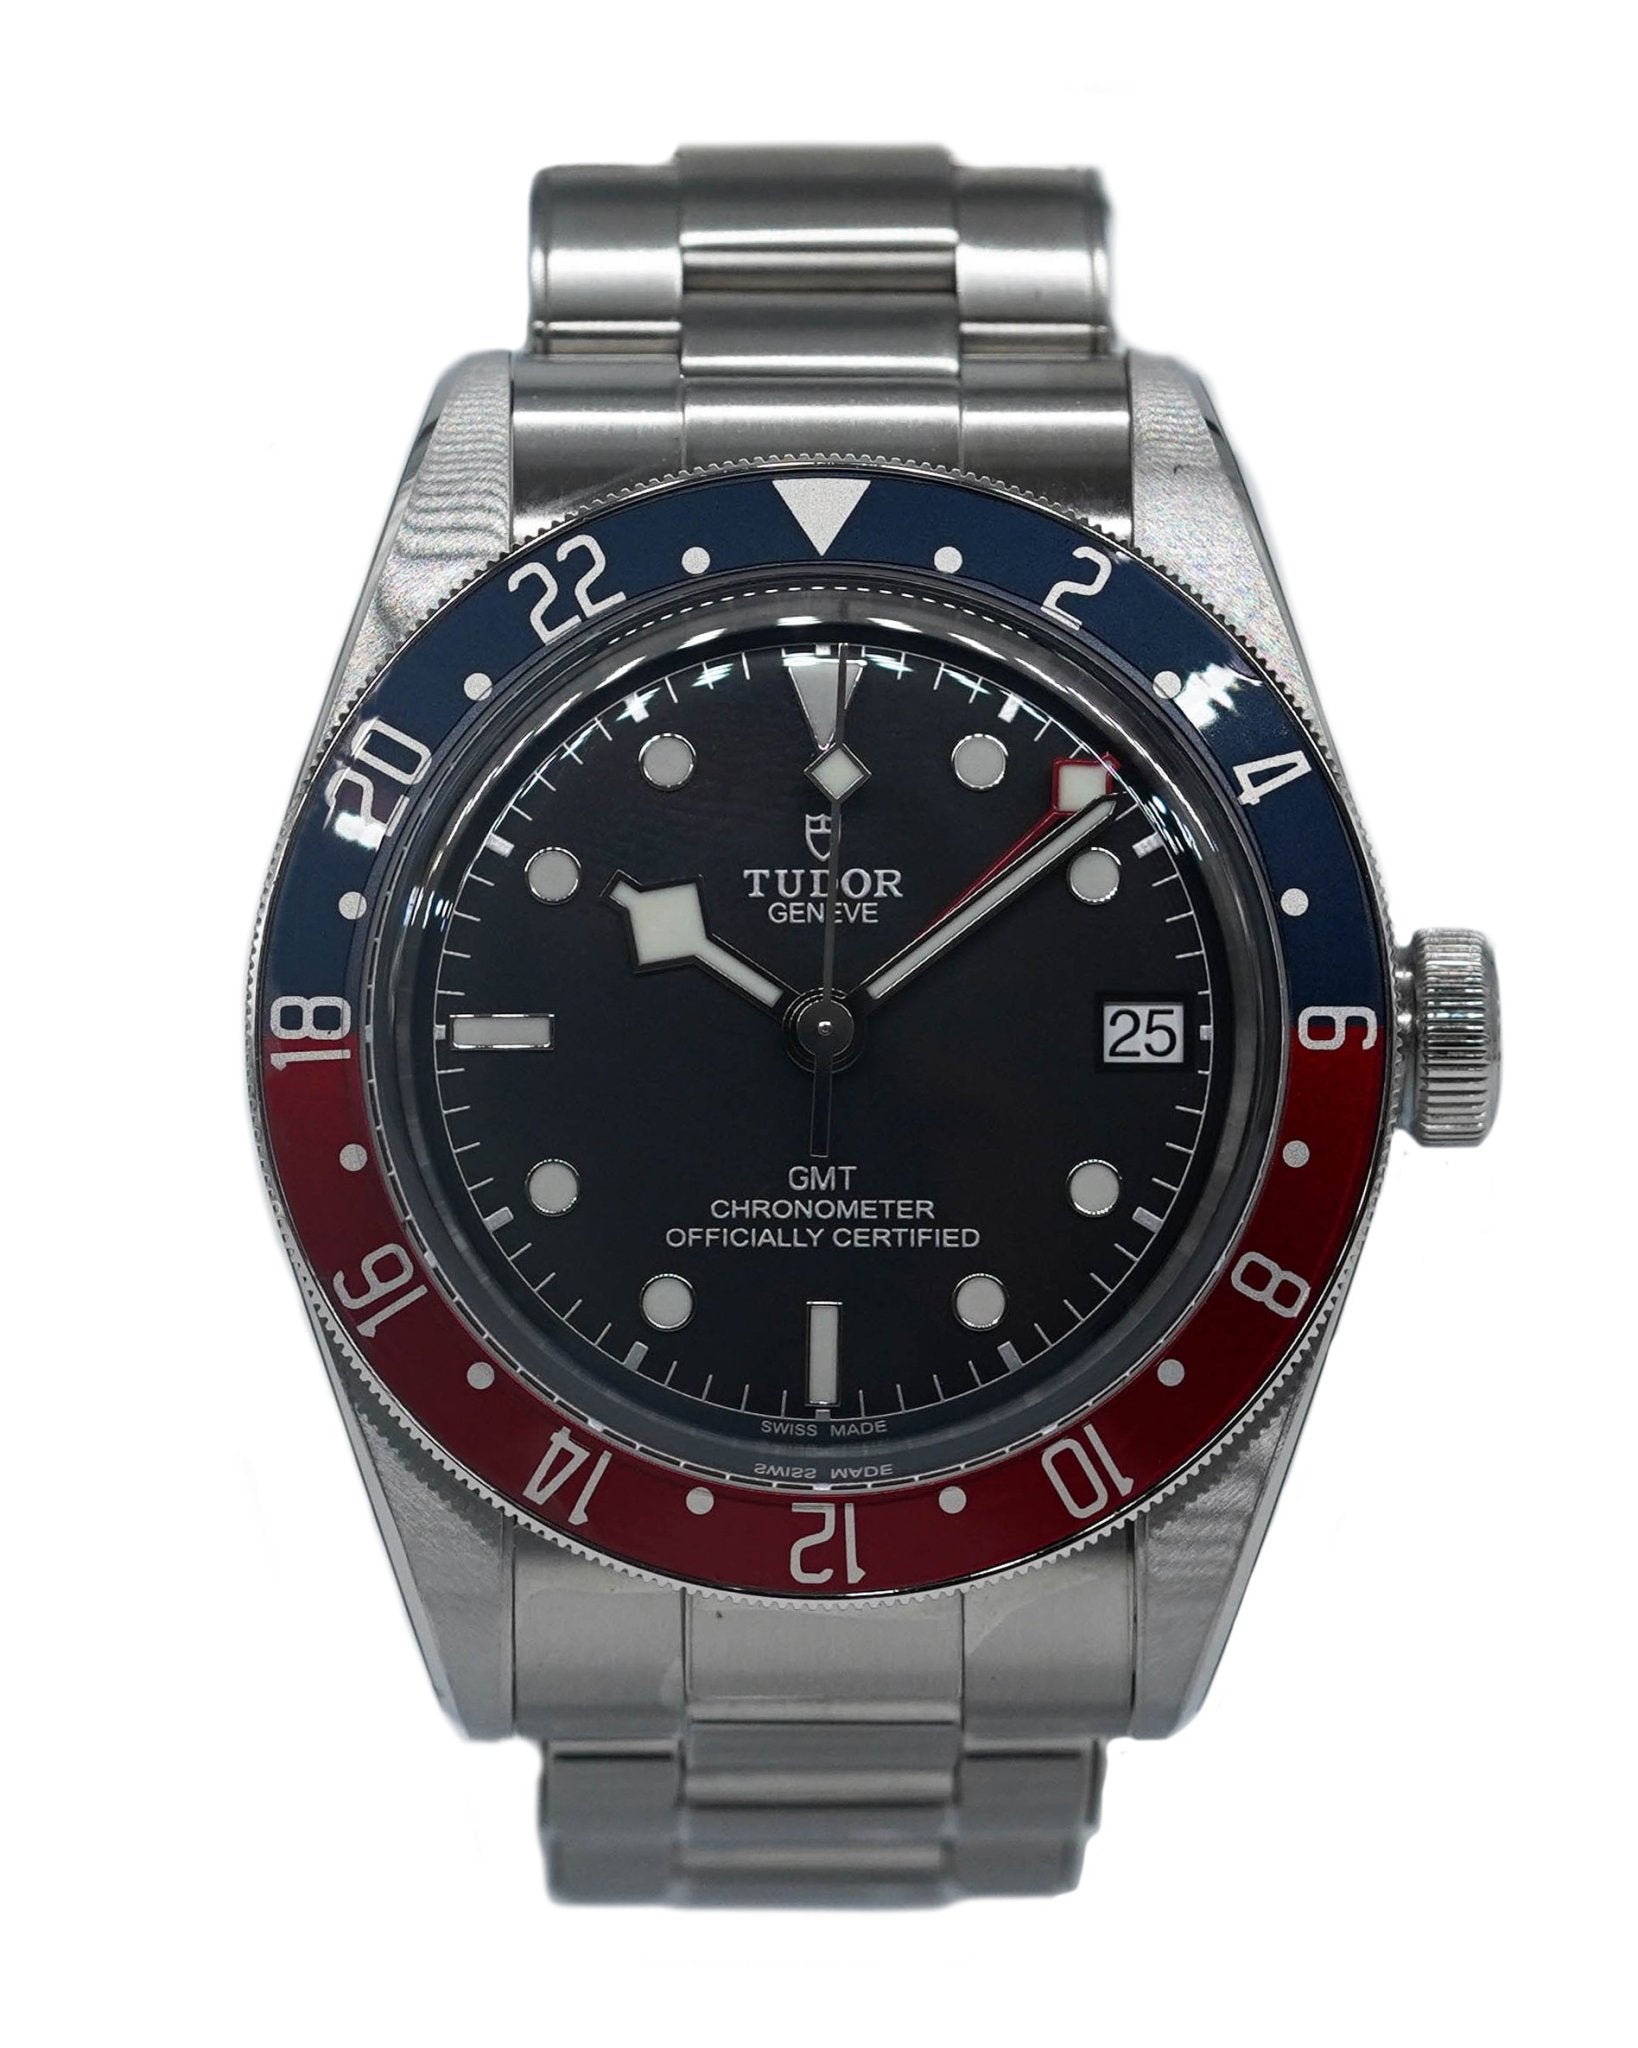 Tudor Black Bay GMT Watch Protection Kit - The Watch Protect Company